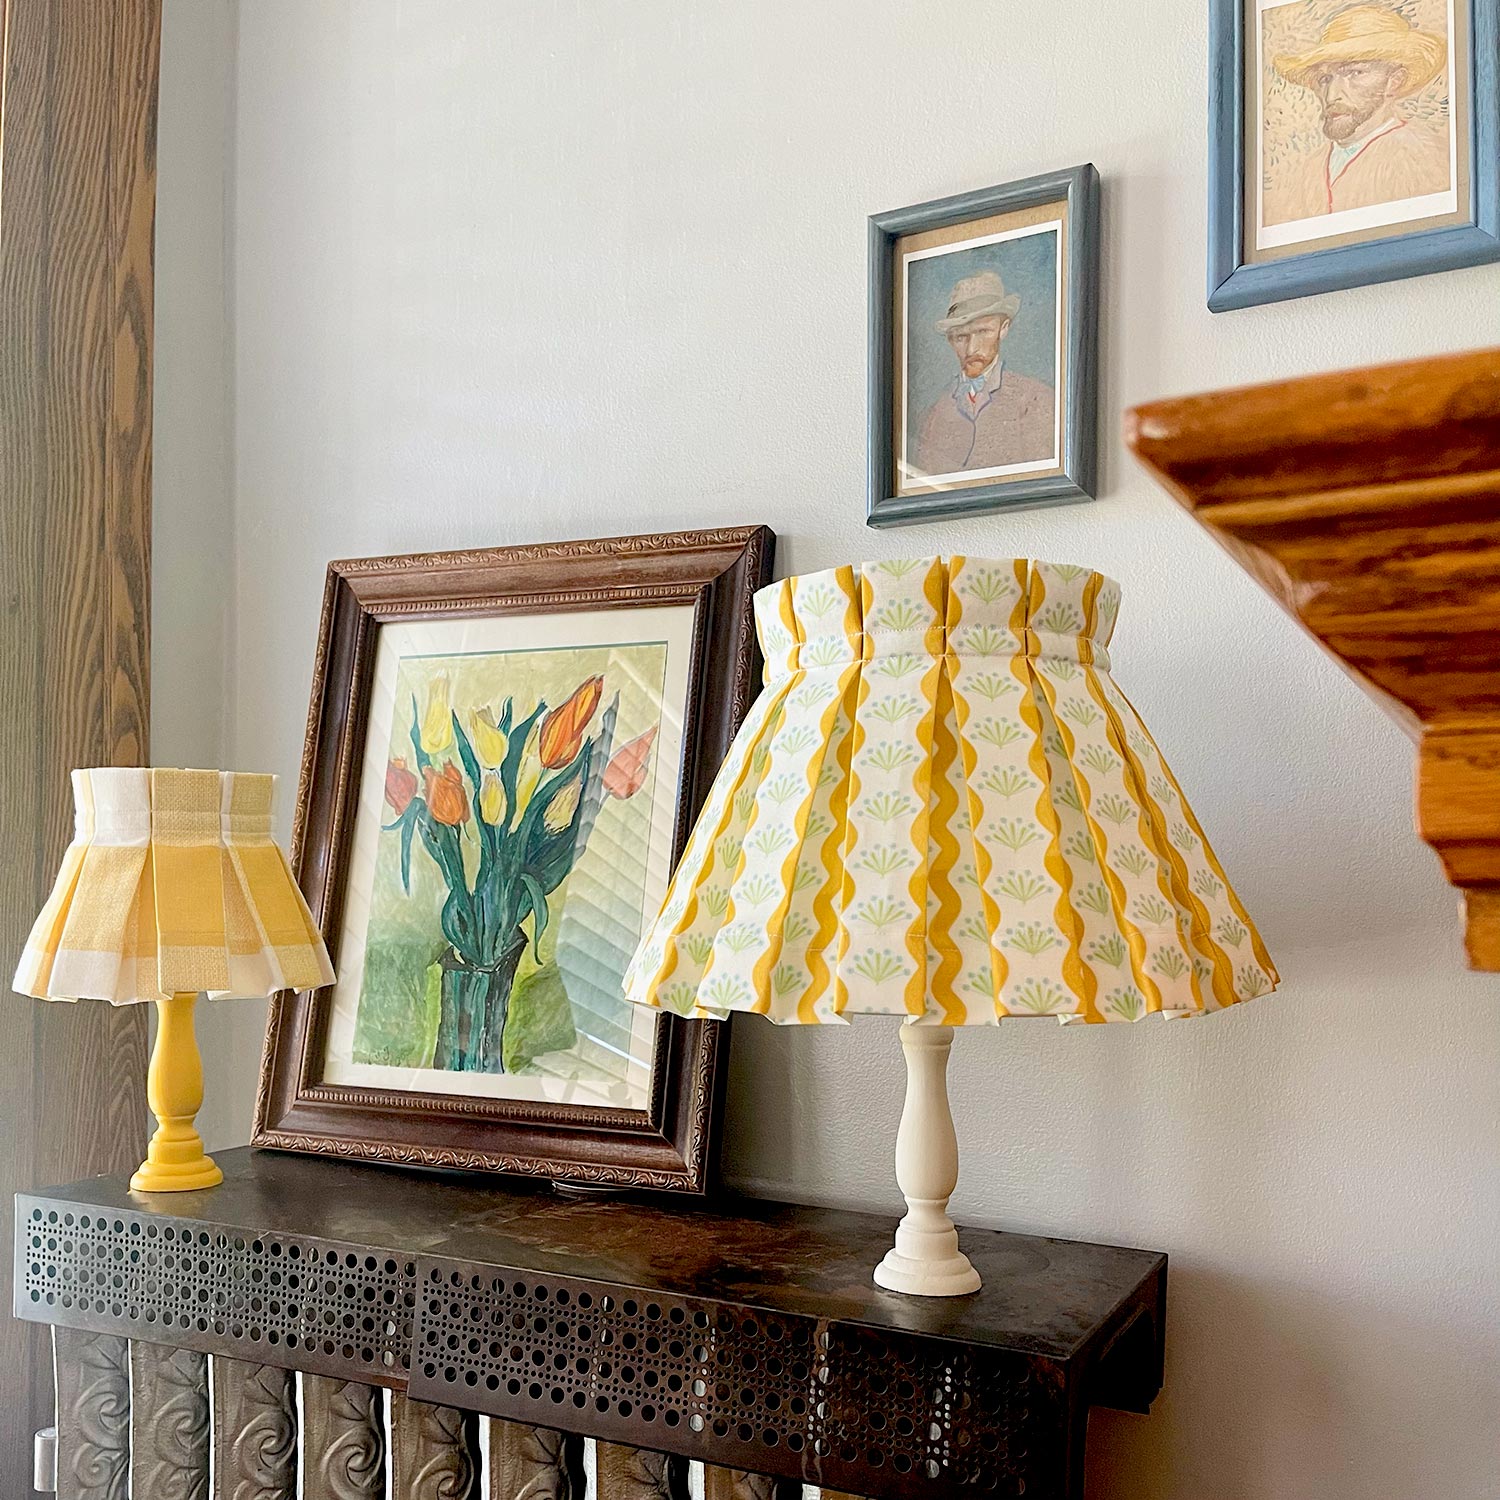 cute floral pattern yellow plaid lampshades with van gogh paintings in the back.